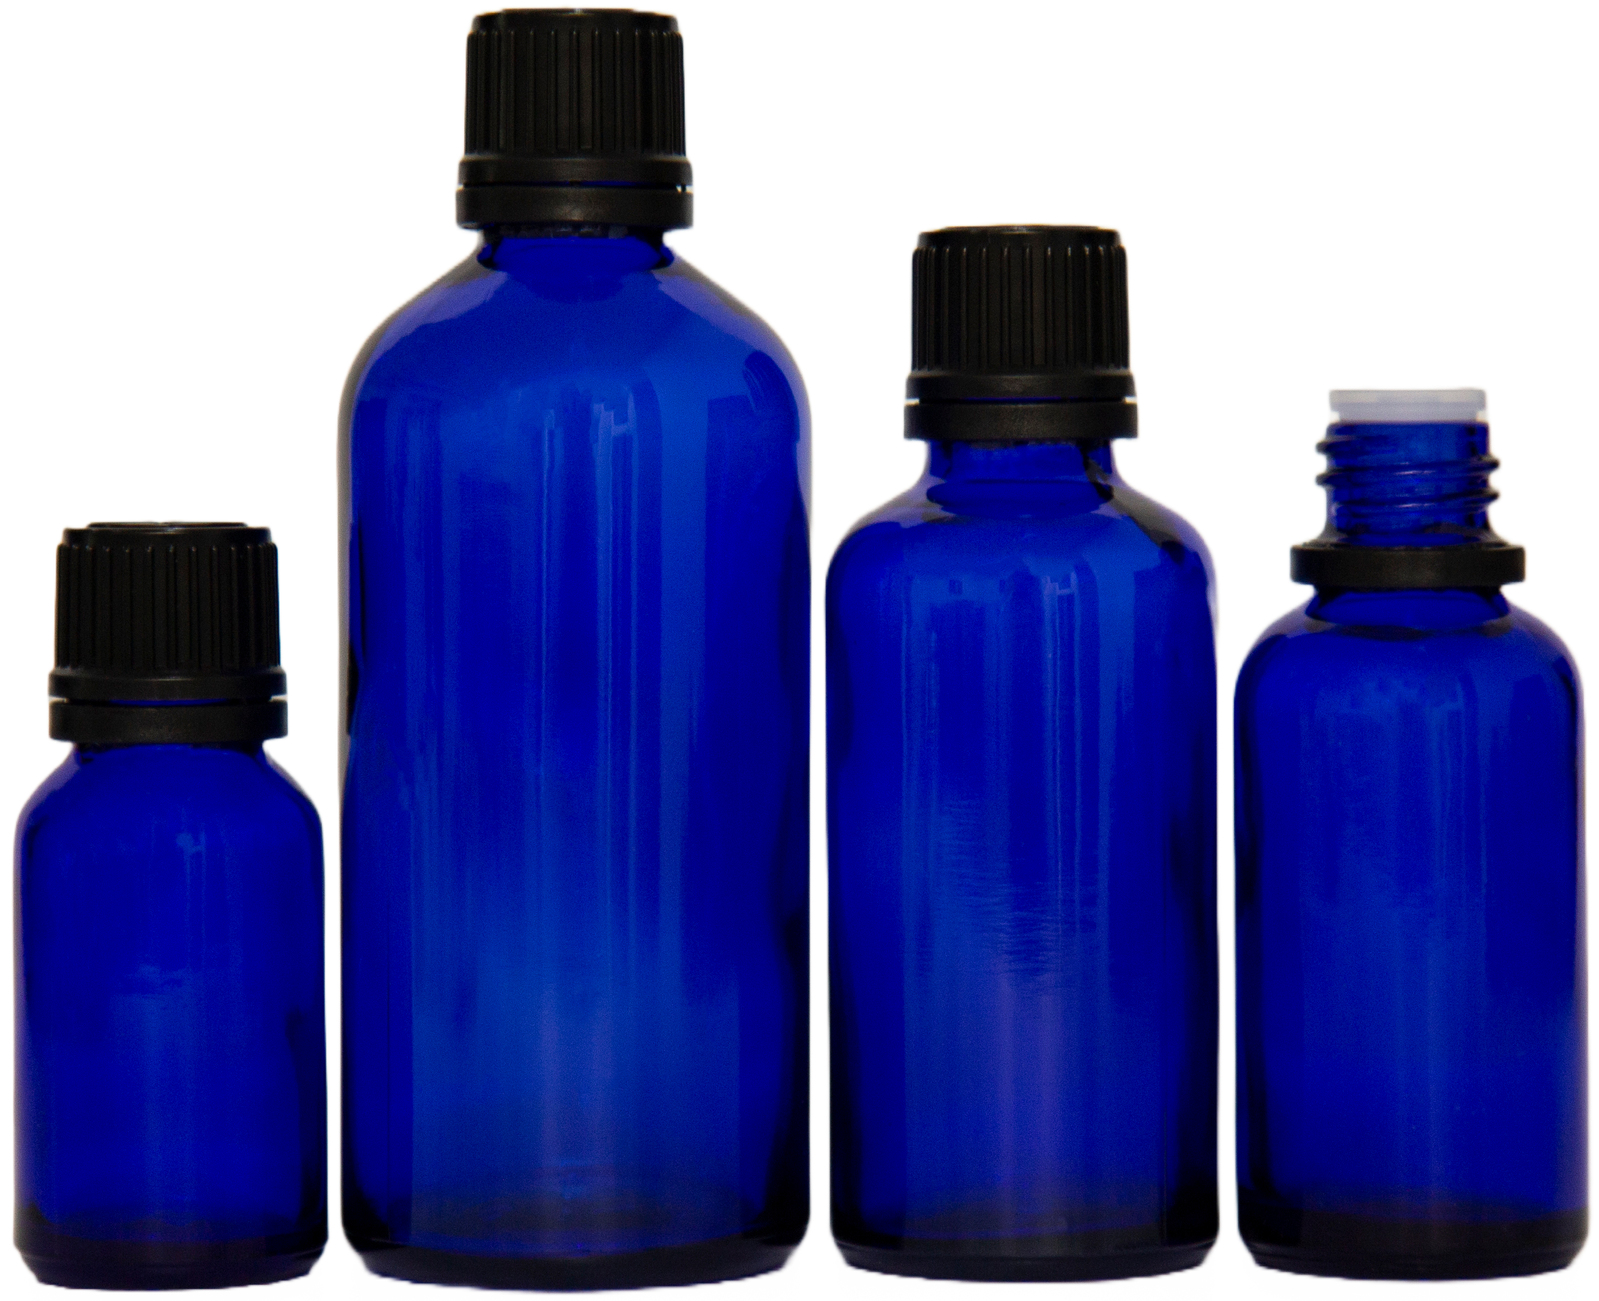 Cobalt Blue Glass Bottle With Reducer And Black Cap